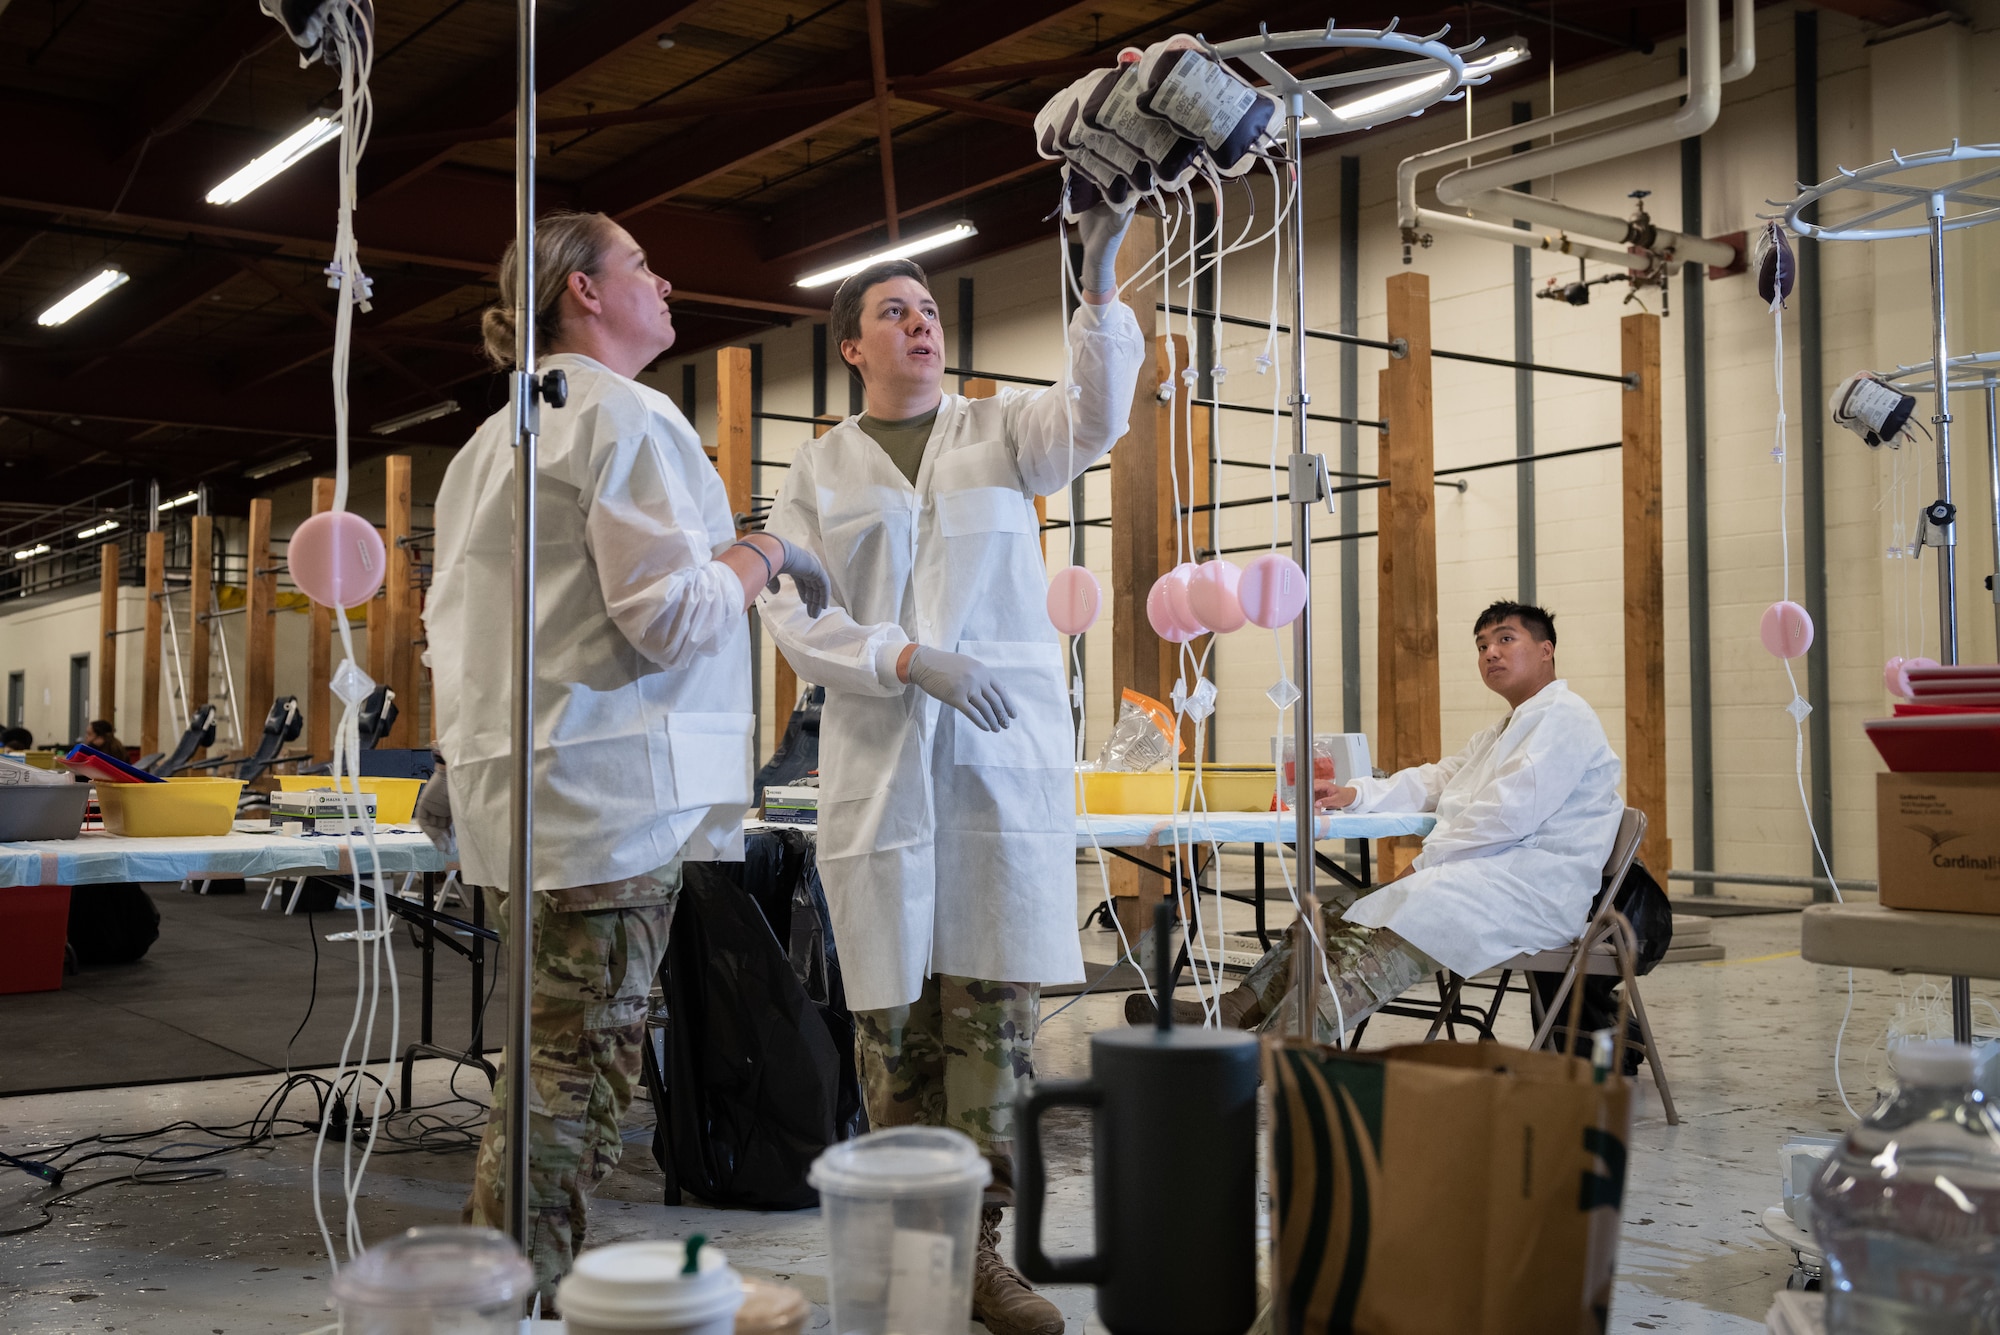 U.S. Army Staff Sgt. Emery Collier, Sgt. Aubree Davis, and Spc. Kyle Xu, inspect bags of donated blood in the Geronimo Gym at Joint Base Elmendorf-Richardson, Alaska,